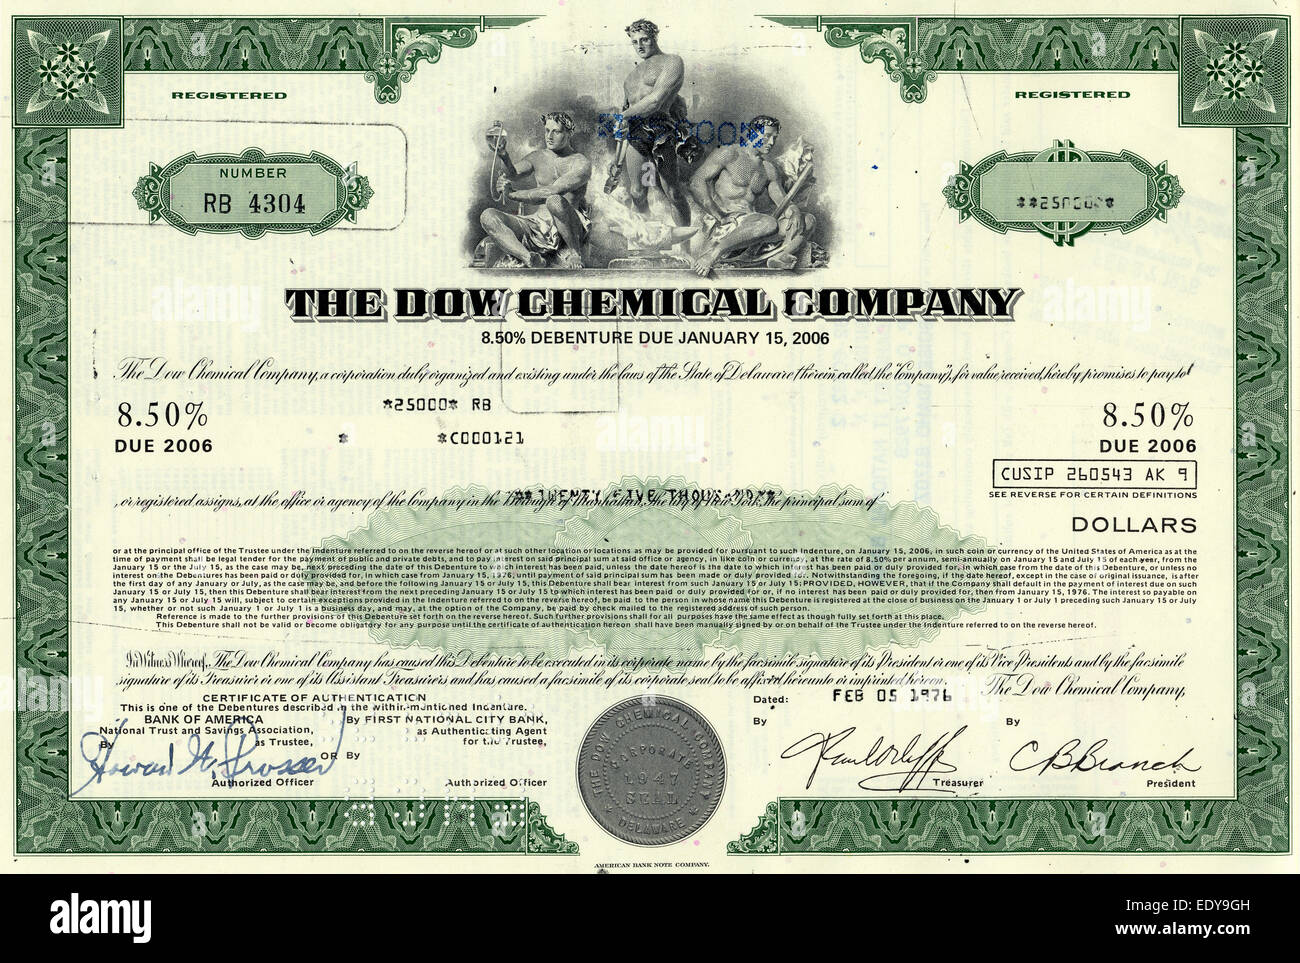 Historic share certificate, The Dow Chemical Company, USA, 1976 Stock Photo